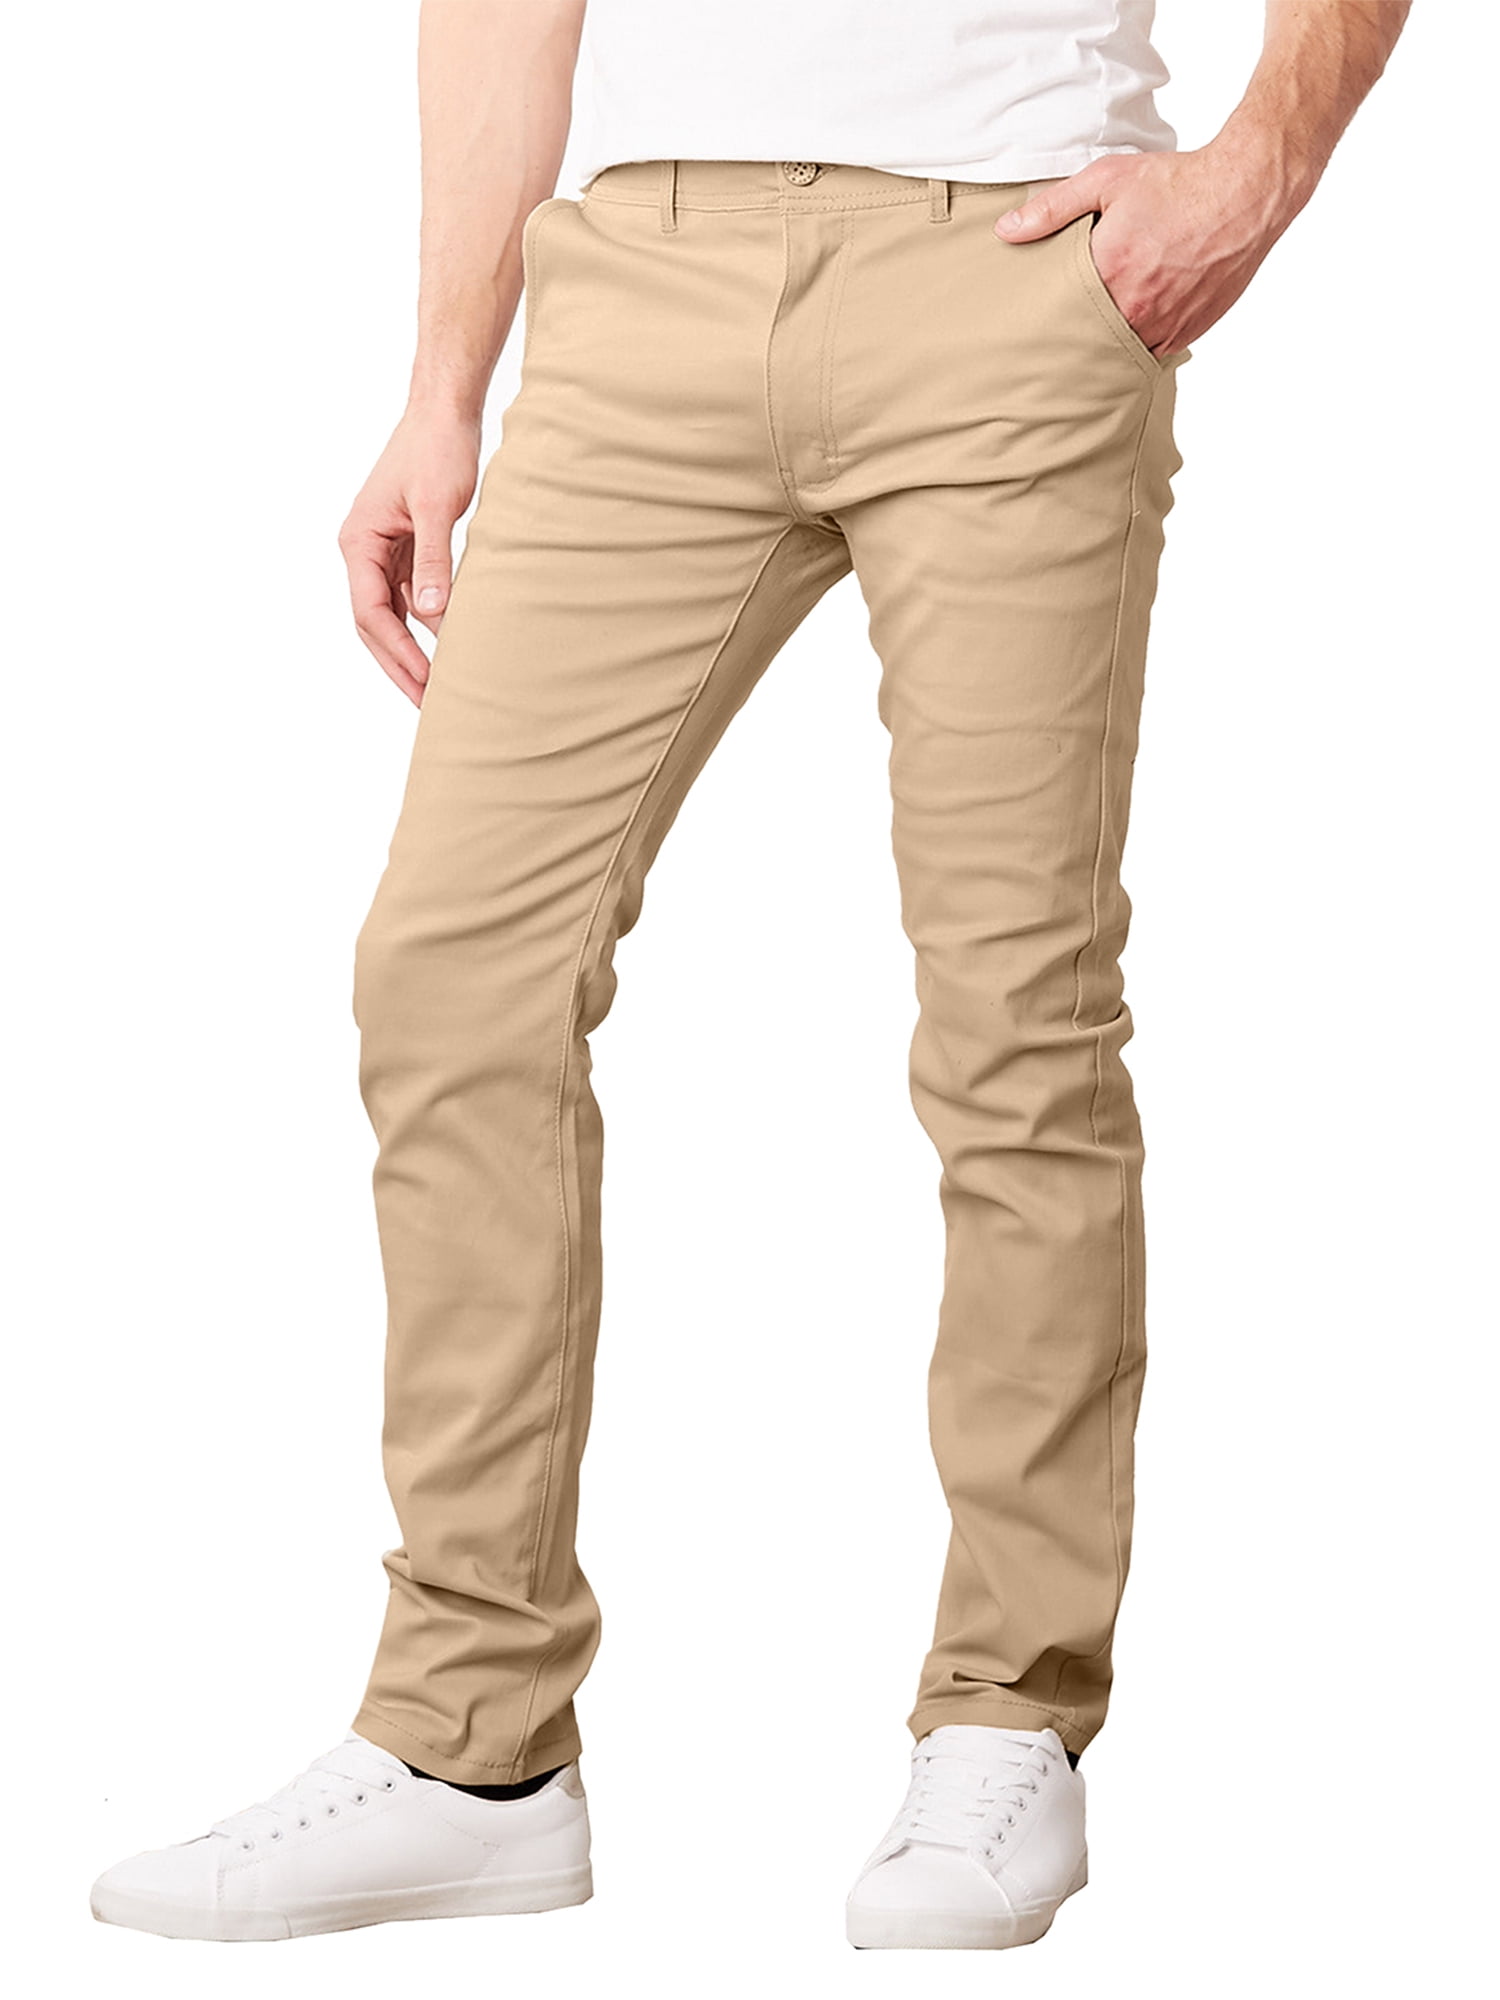 Men's Super Stretch Slim Fit Everyday Chino Pants (Sizes, 30-42 ...